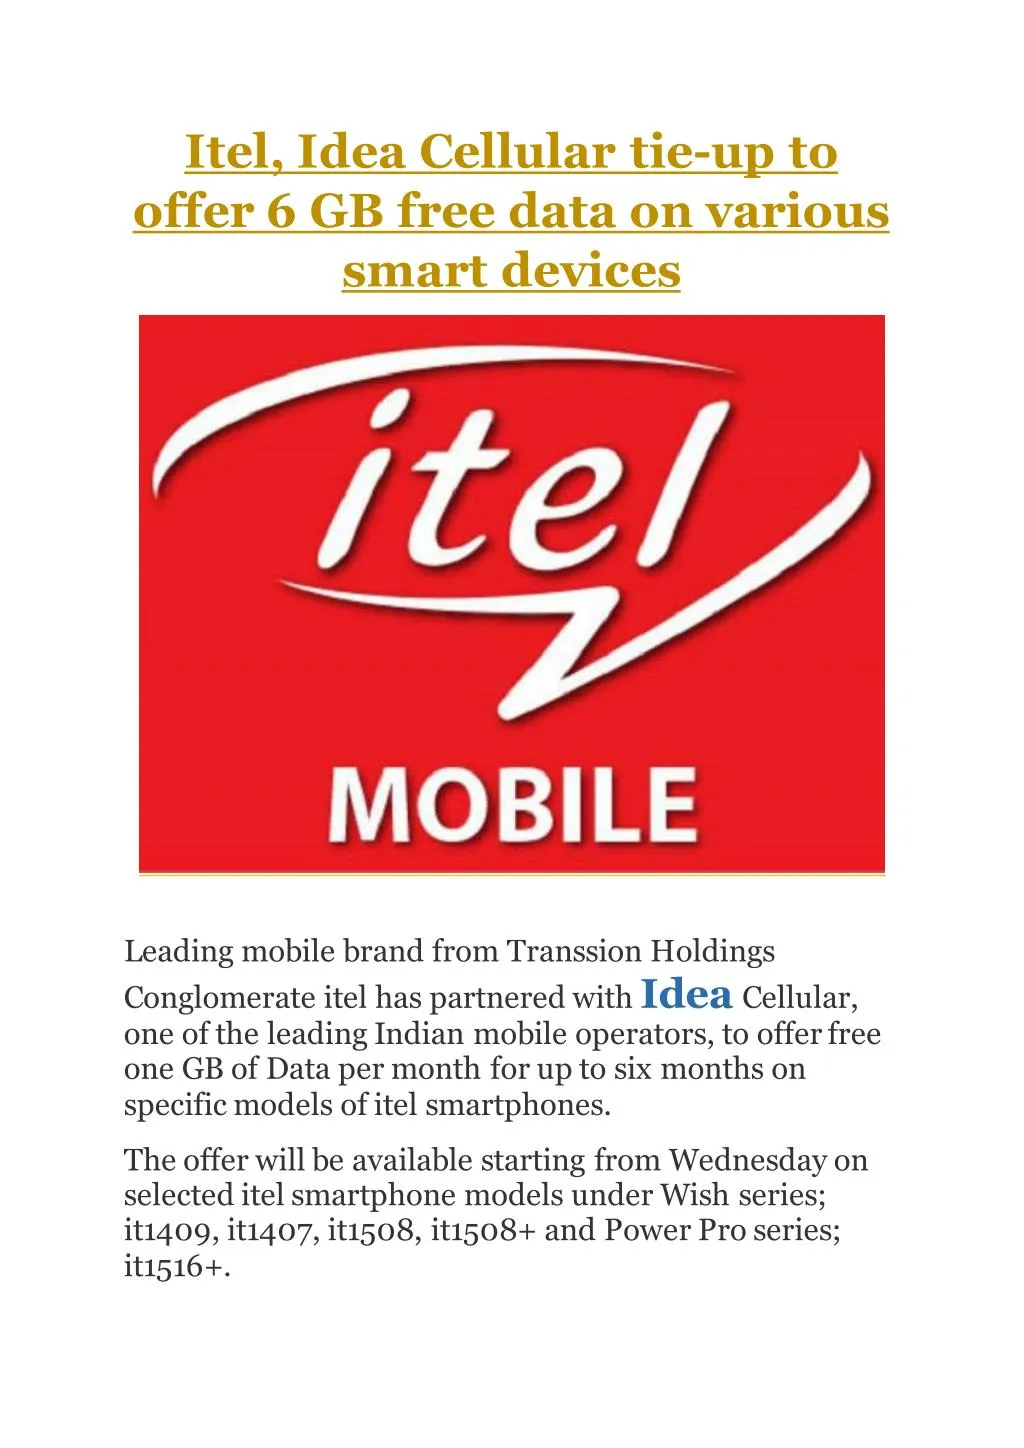 itel idea cellular tie up to offer 6 gb free data